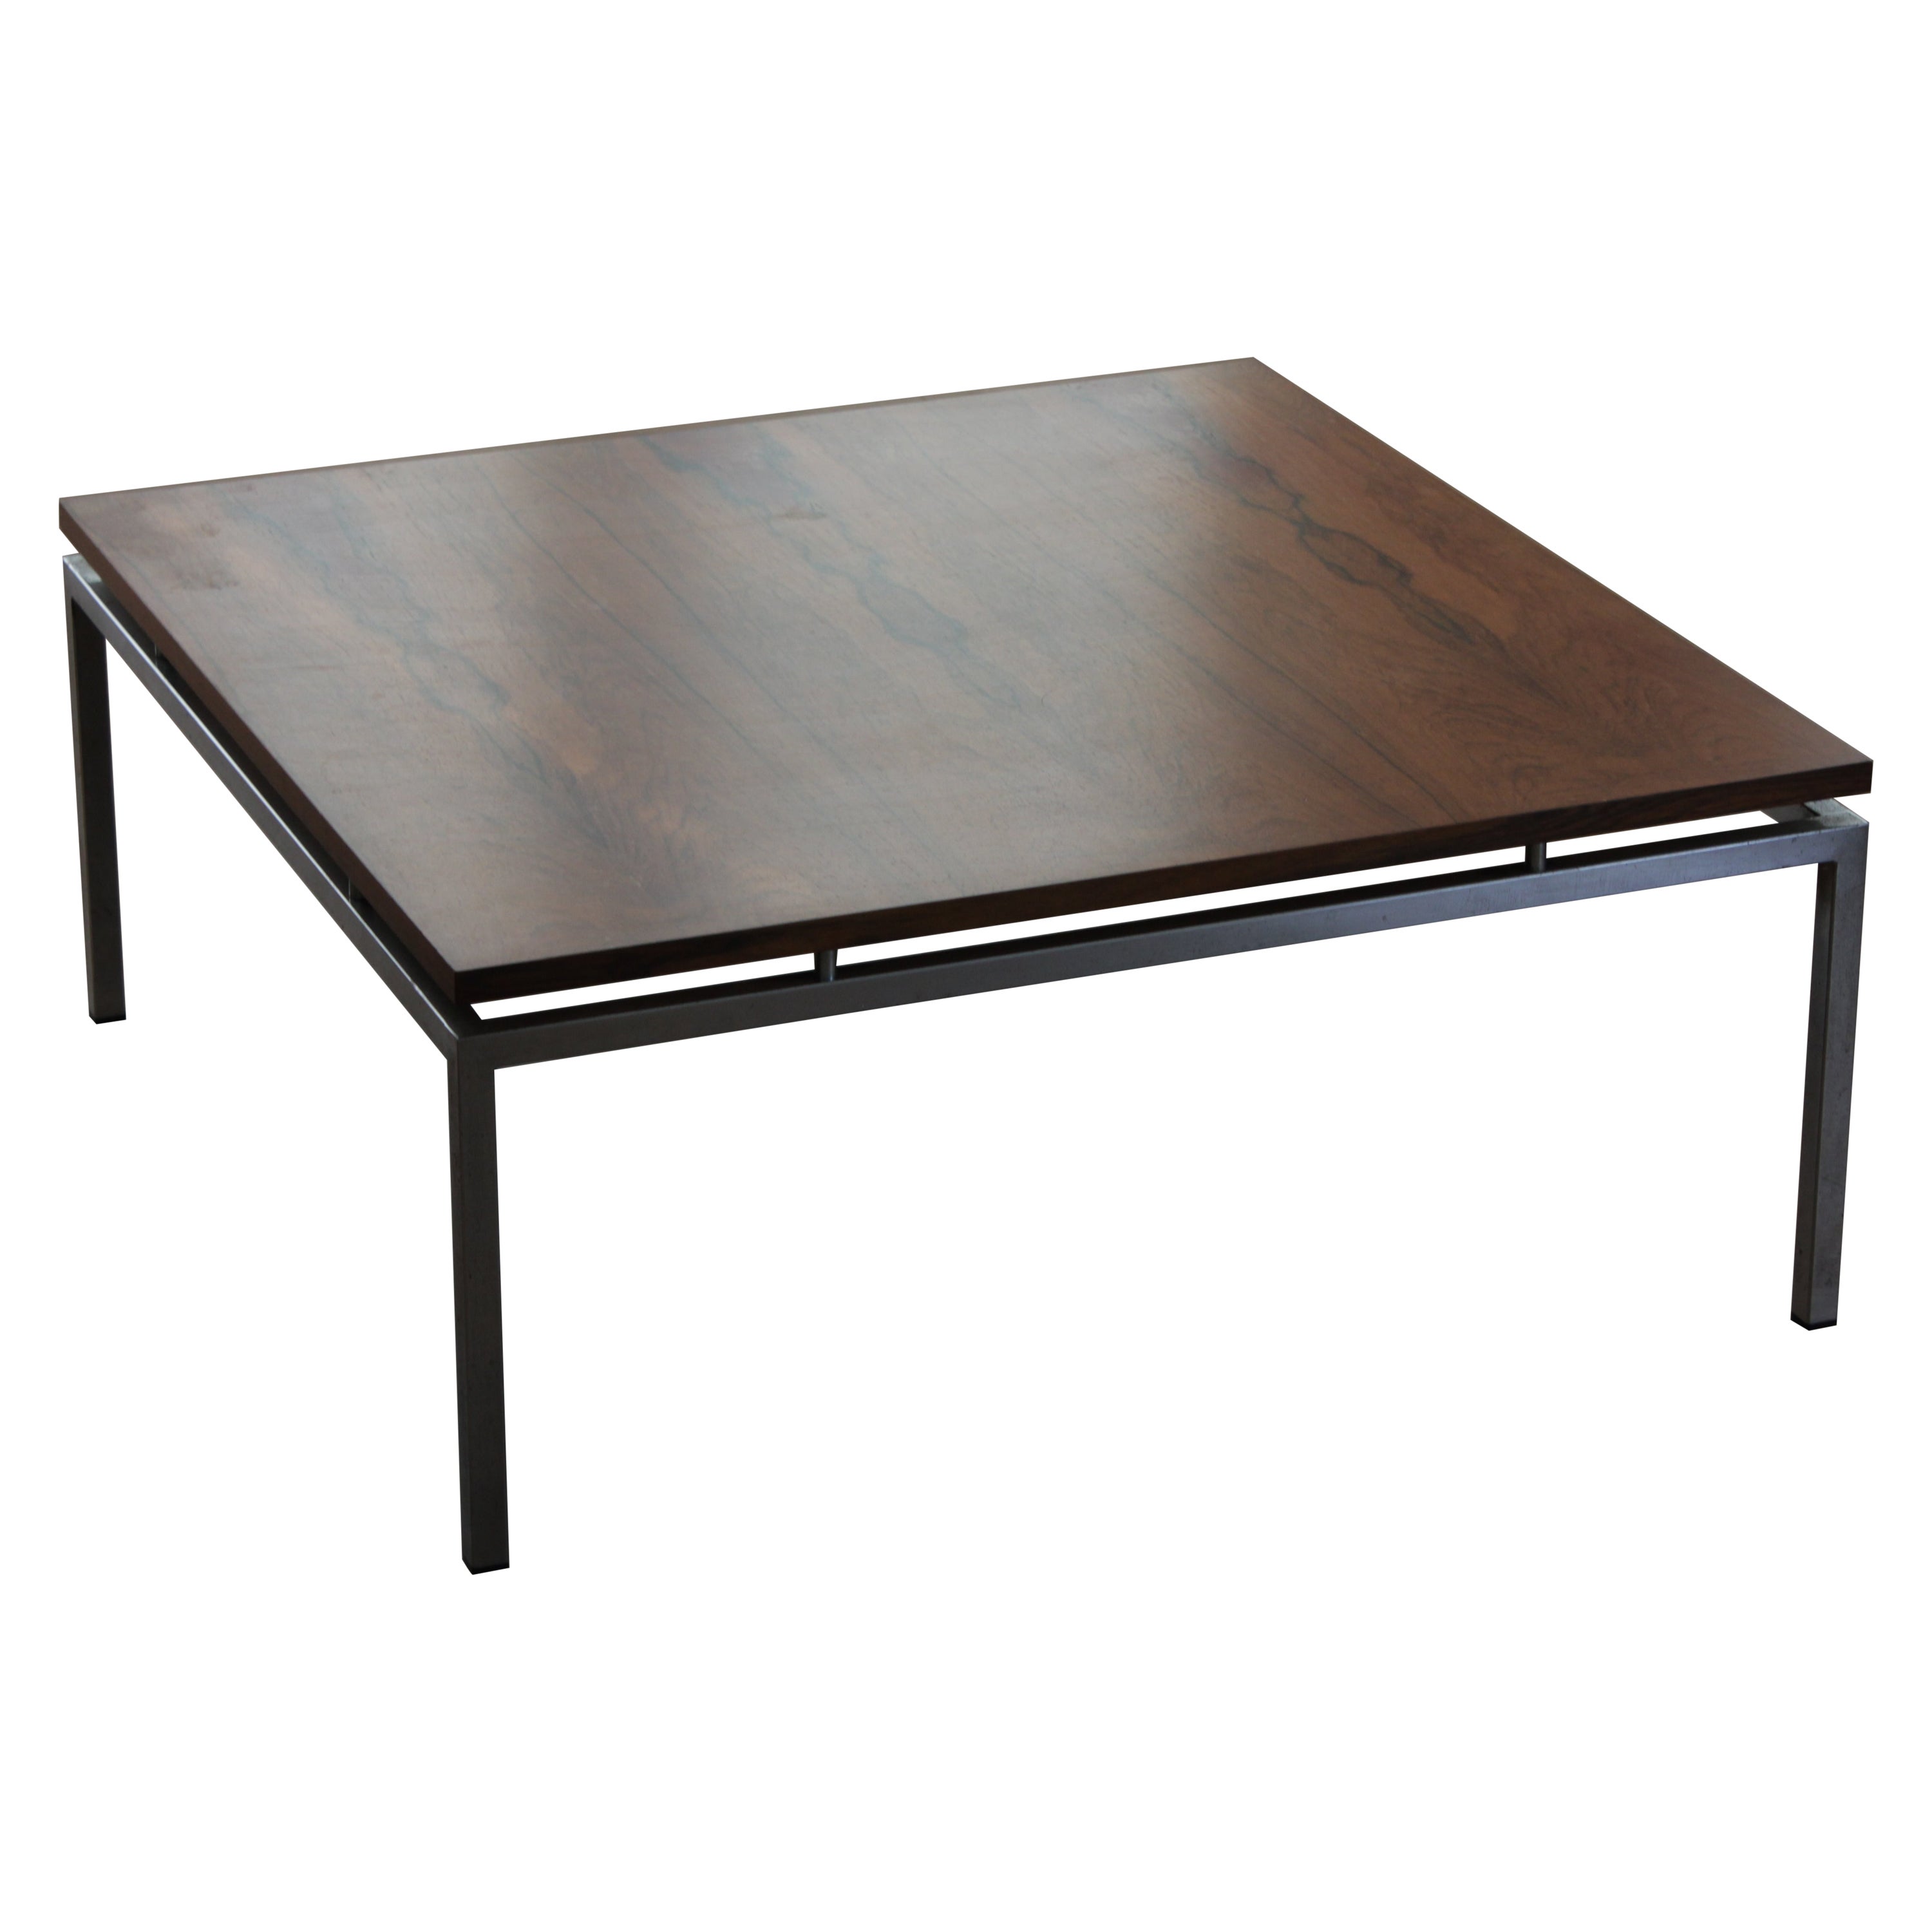 Mid 20th Century Modern Coffee table by Knud Joos-Jensen for Jason Møbler For Sale